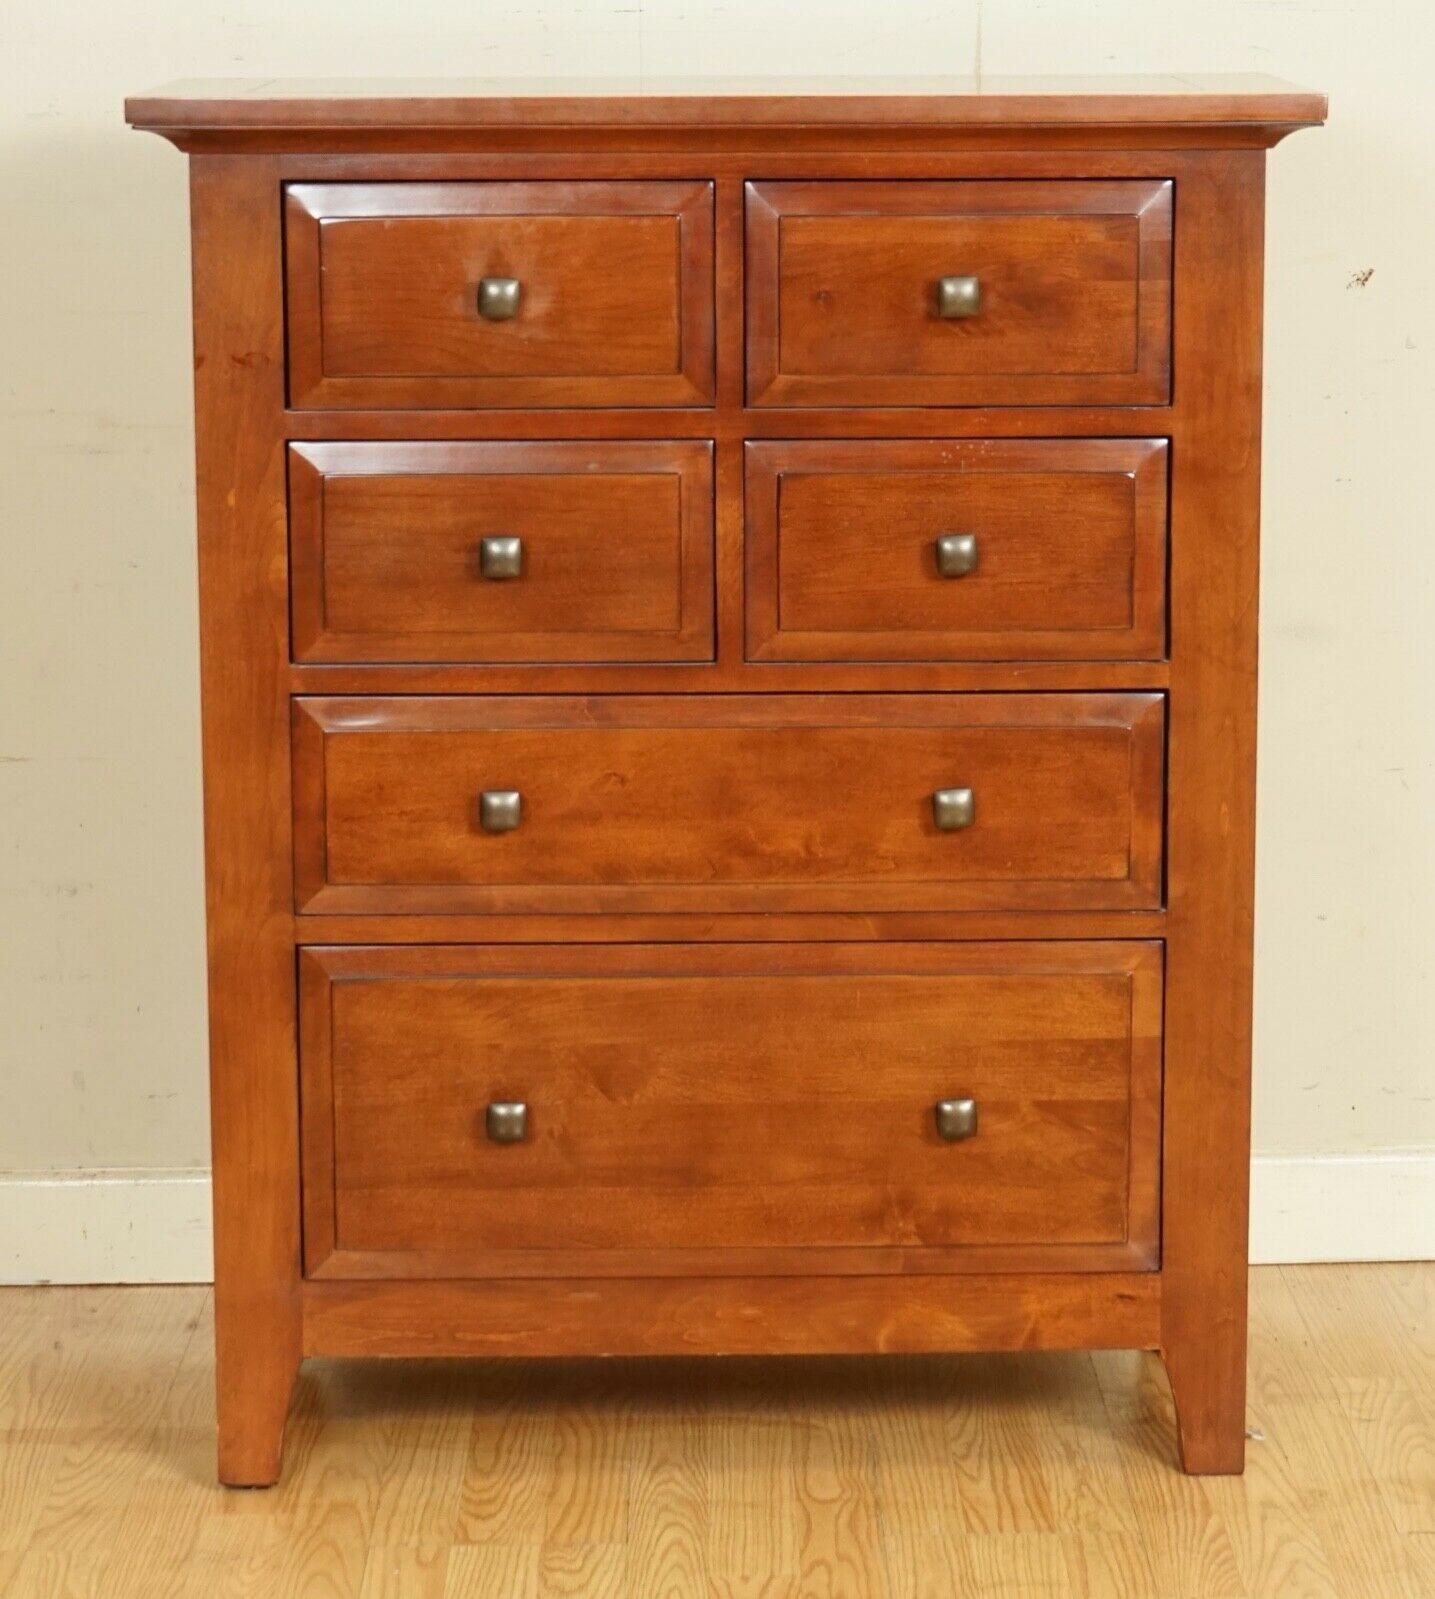 We are delighted to sell this Lovely Willis & Gambier mahogany chest of drawers.
Made from Hevea wood and Prima Vera Veneers.

We have lightly restored this by giving it a hand clean all over, wax and hand polish. 

Please view our pictures as